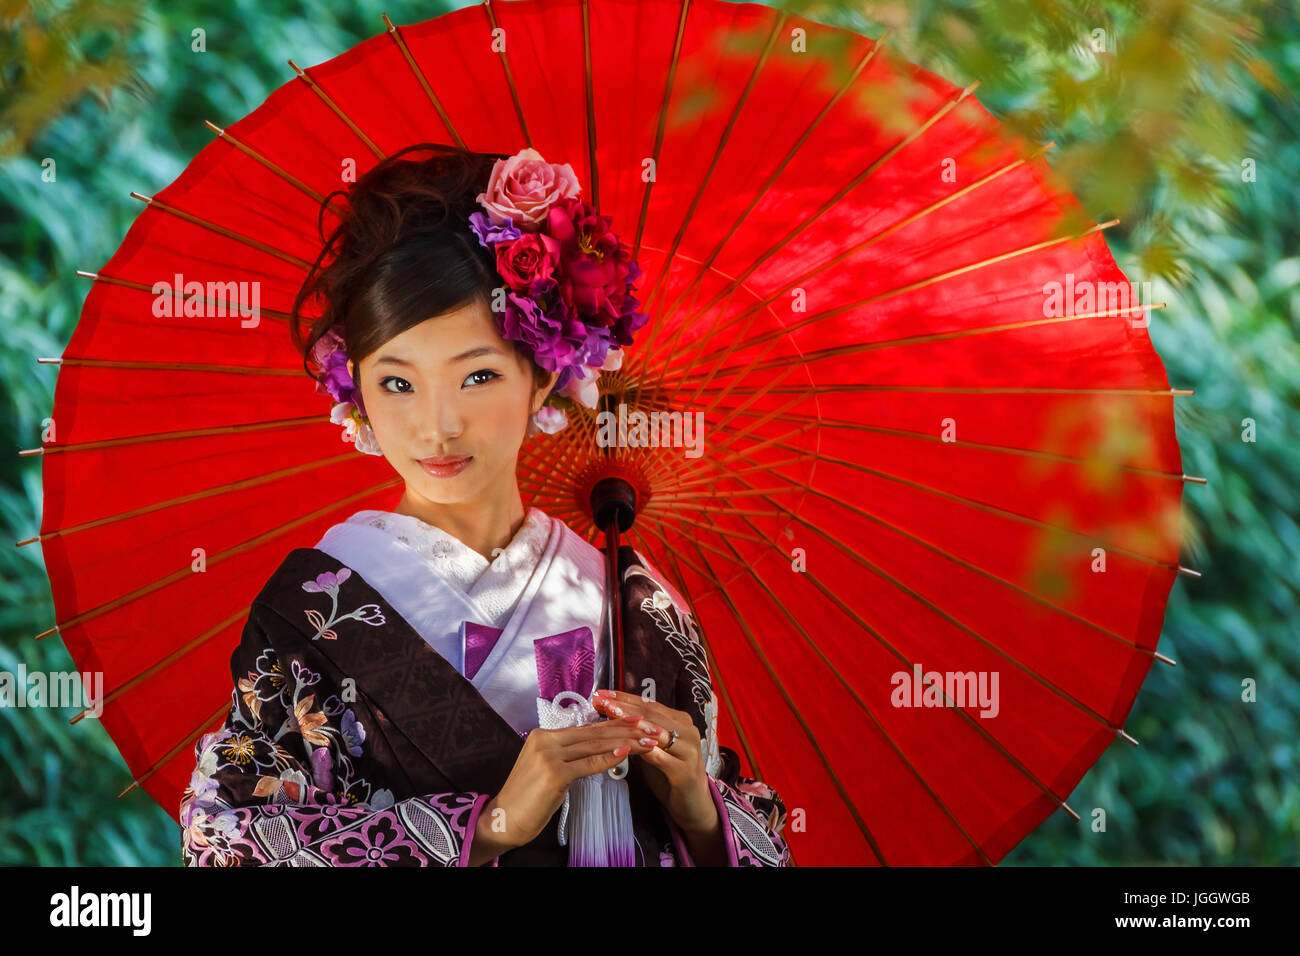 Japanese woman in a Traditional Kimono Dress with a Red Umbrella Stock Photo